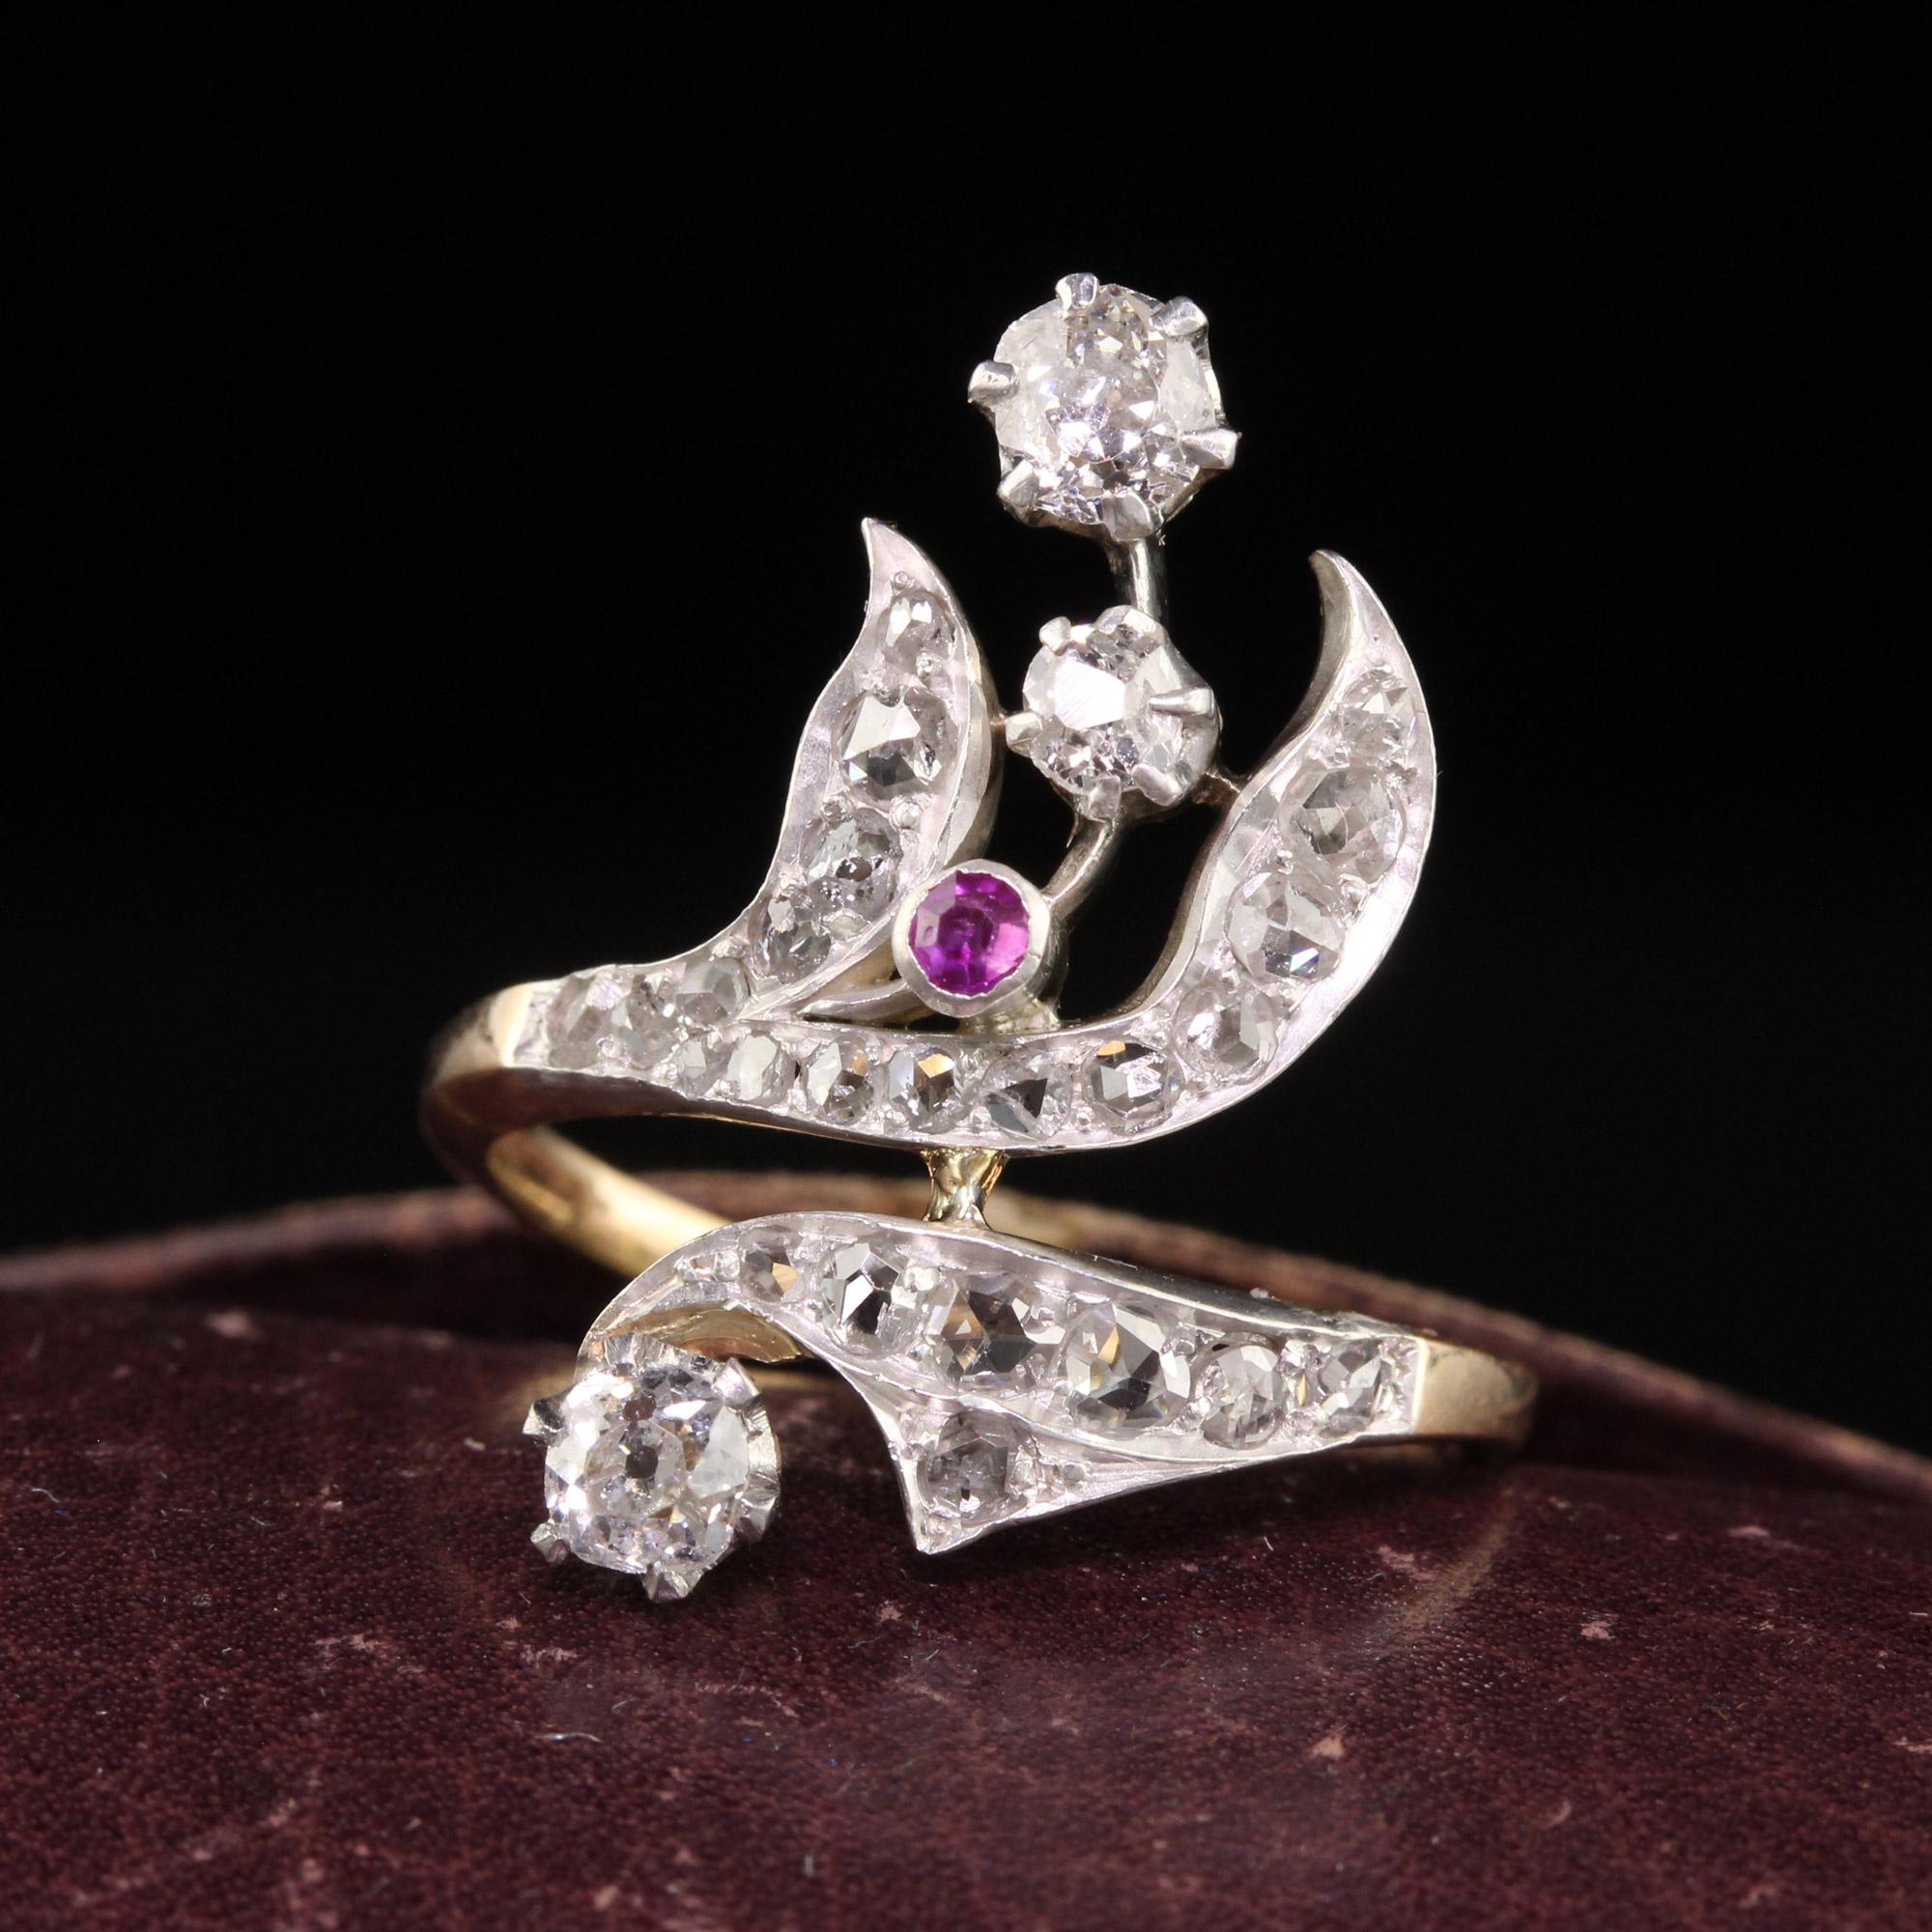 Beautiful Antique Victorian 18K Yellow Gold Silver Top Rose Cut and Ruby Floral Ring. This gorgeous ring is crafted in 18k yellow gold and silver top. The ring has rose cut diamonds all over the petals and three old mine cut diamonds in different